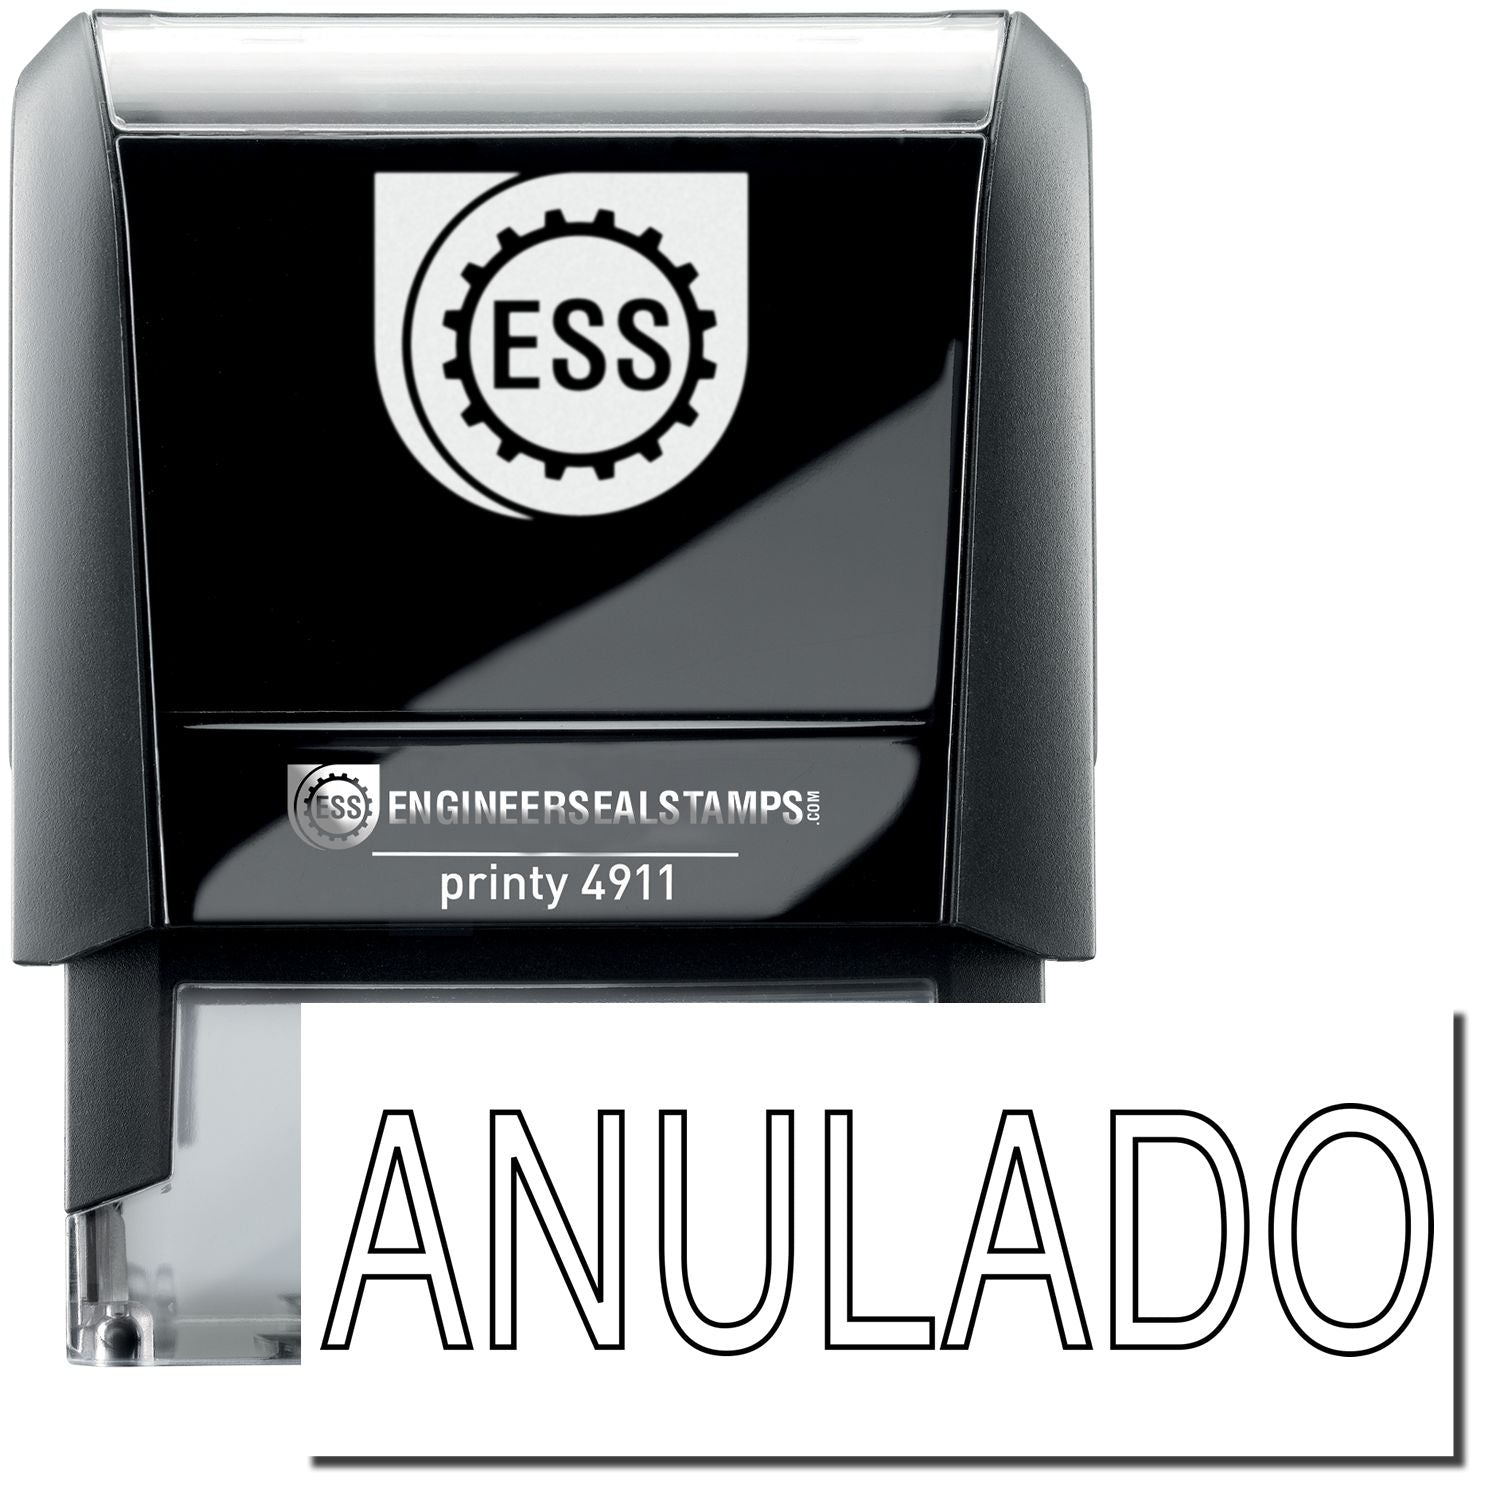 A self-inking stamp with a stamped image showing how the text "ANULADO" in an outline style is displayed after stamping.